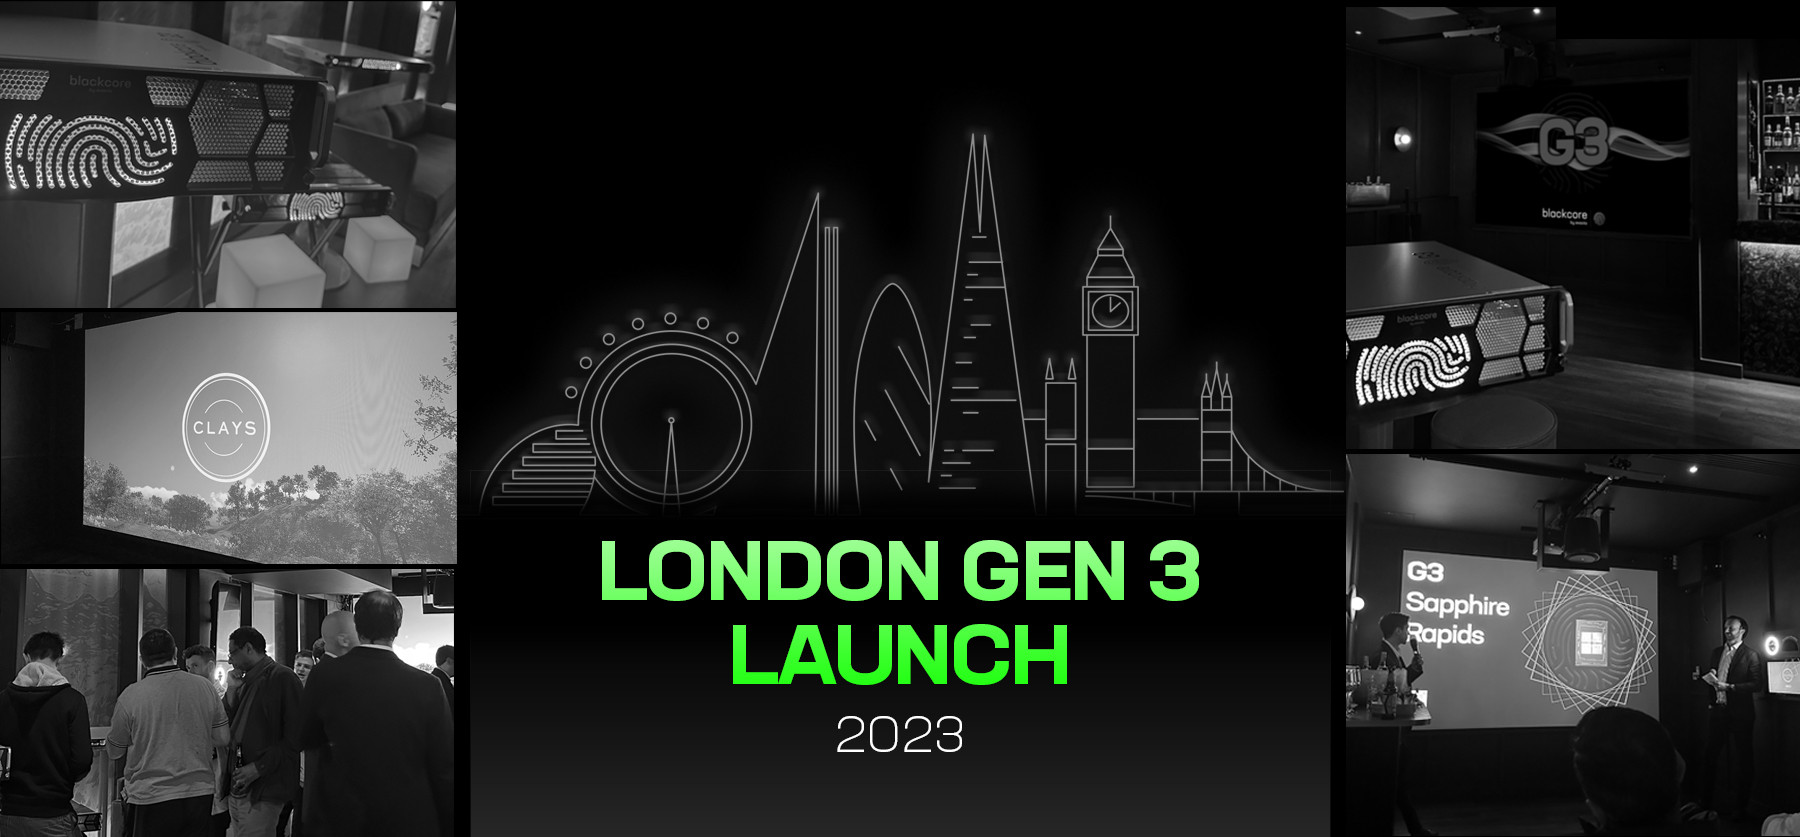 GEN 3 Launches in London image